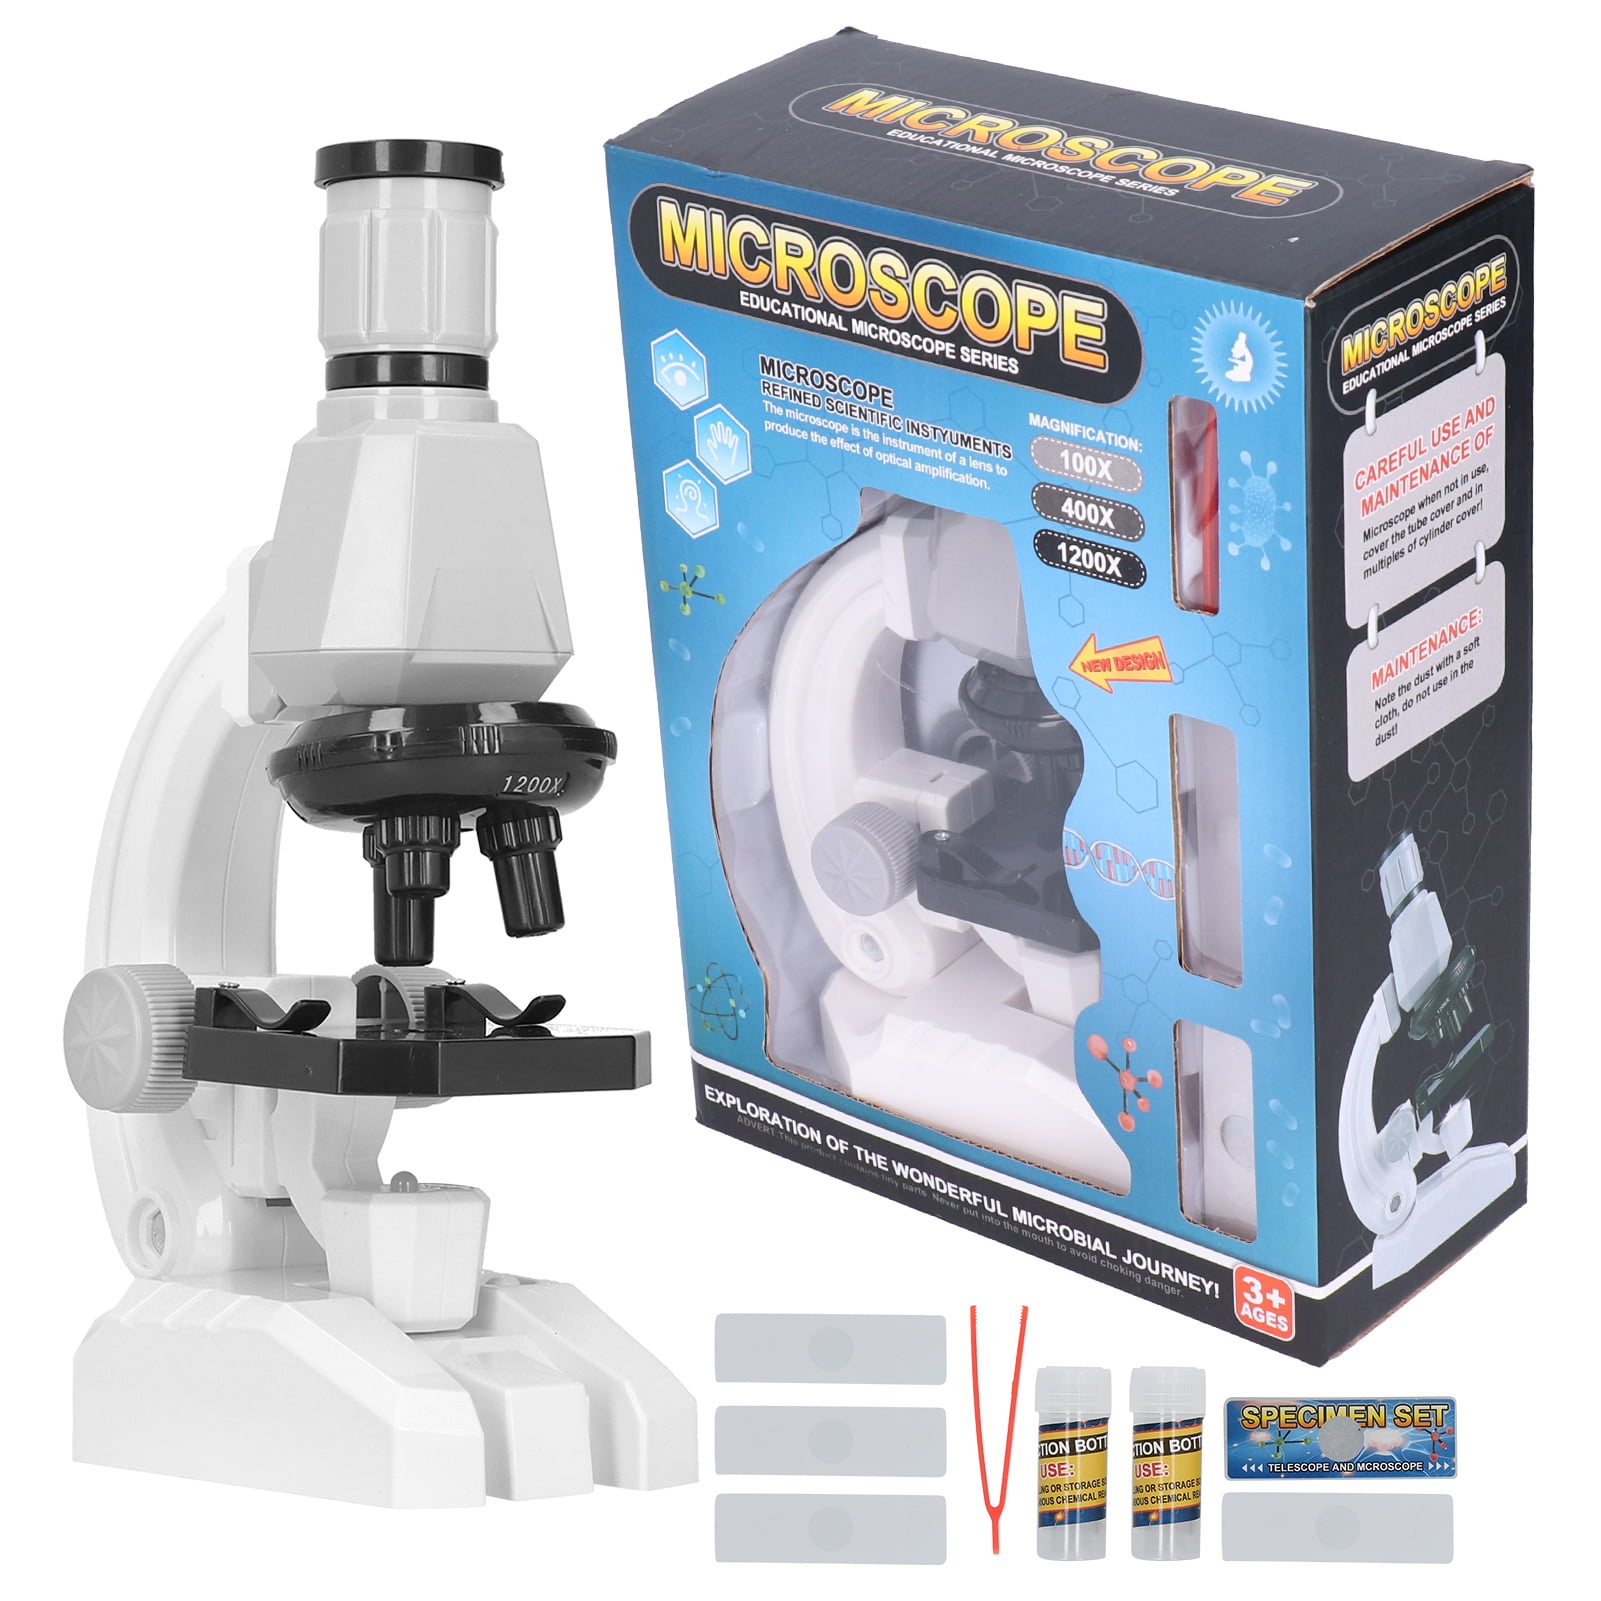 100X 400X 1200X Students Beginner Microscope Kit LED Magnifier Educational Toys 